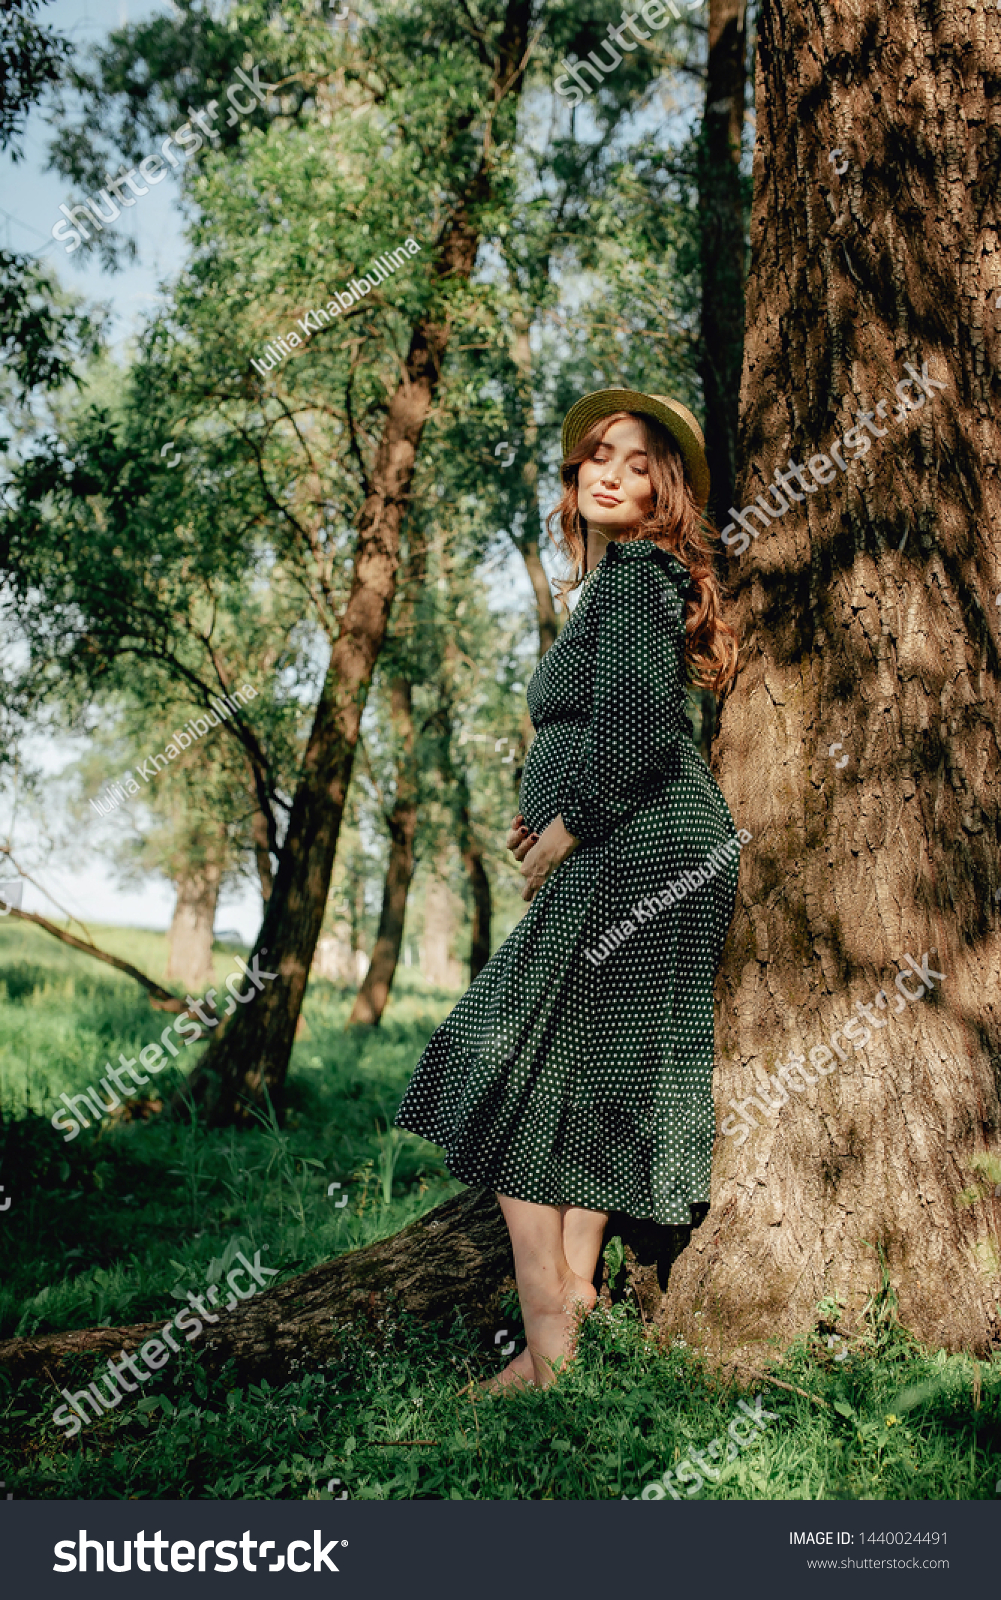 https://image.shutterstock.com/shutterstock/photos/1440024491/display_1500/stock-photo-smiling-pretty-pregnant-woman-touching-around-the-abdomen-against-greenery-background-wearing-1440024491.jpg